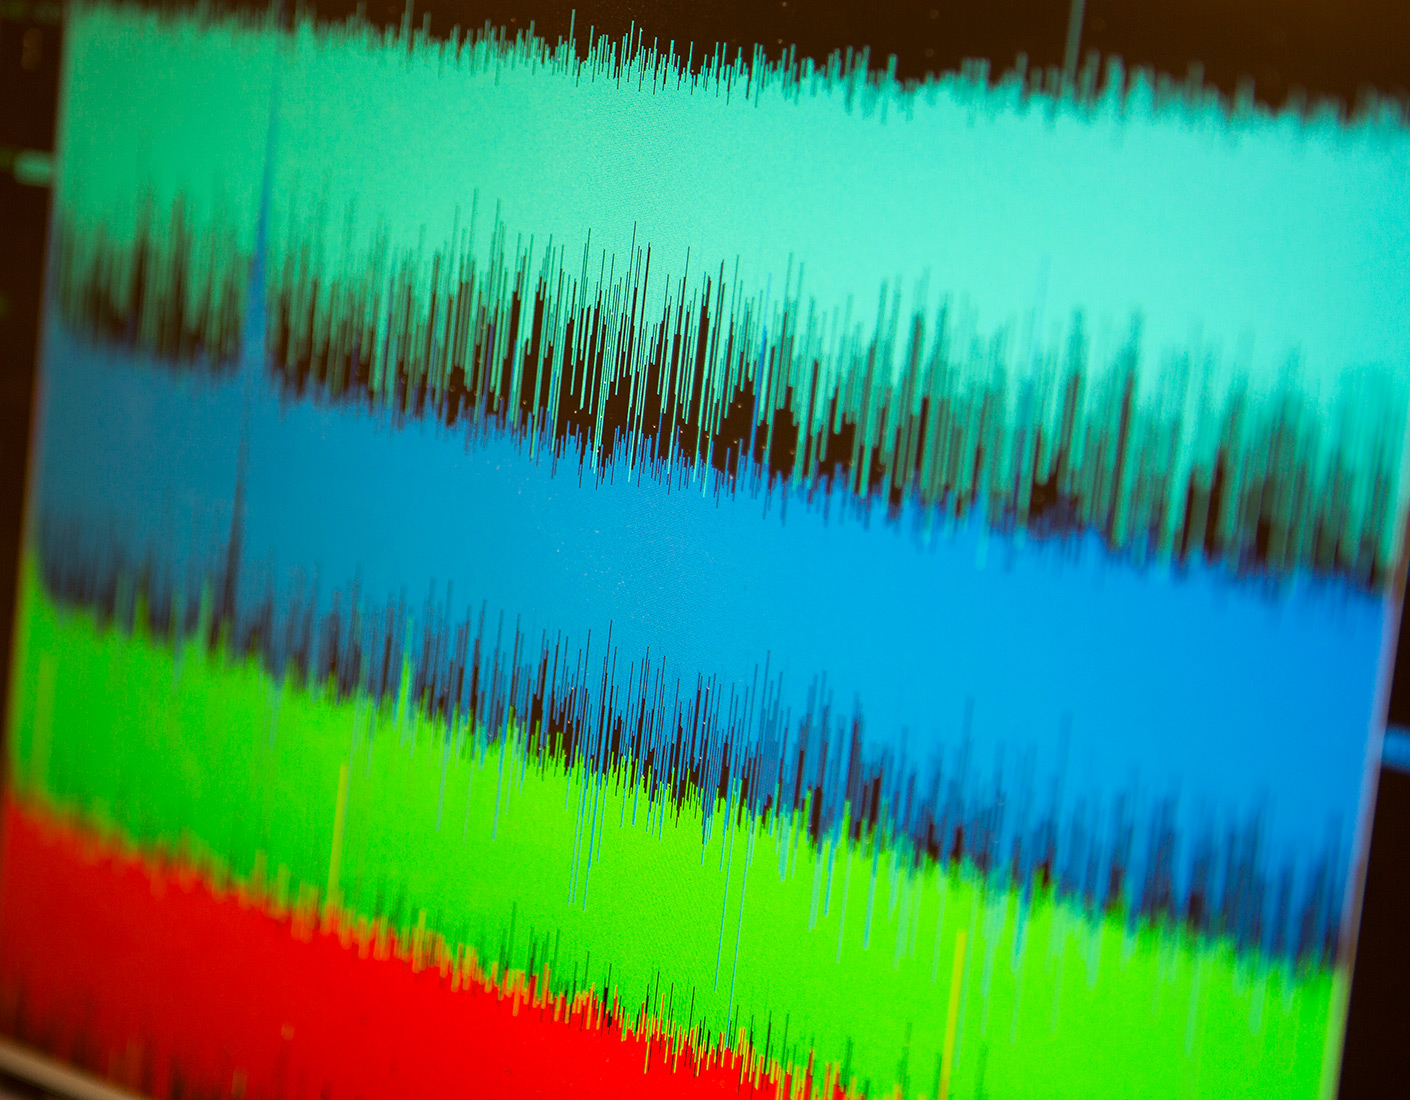 Colored bars of a seismograph